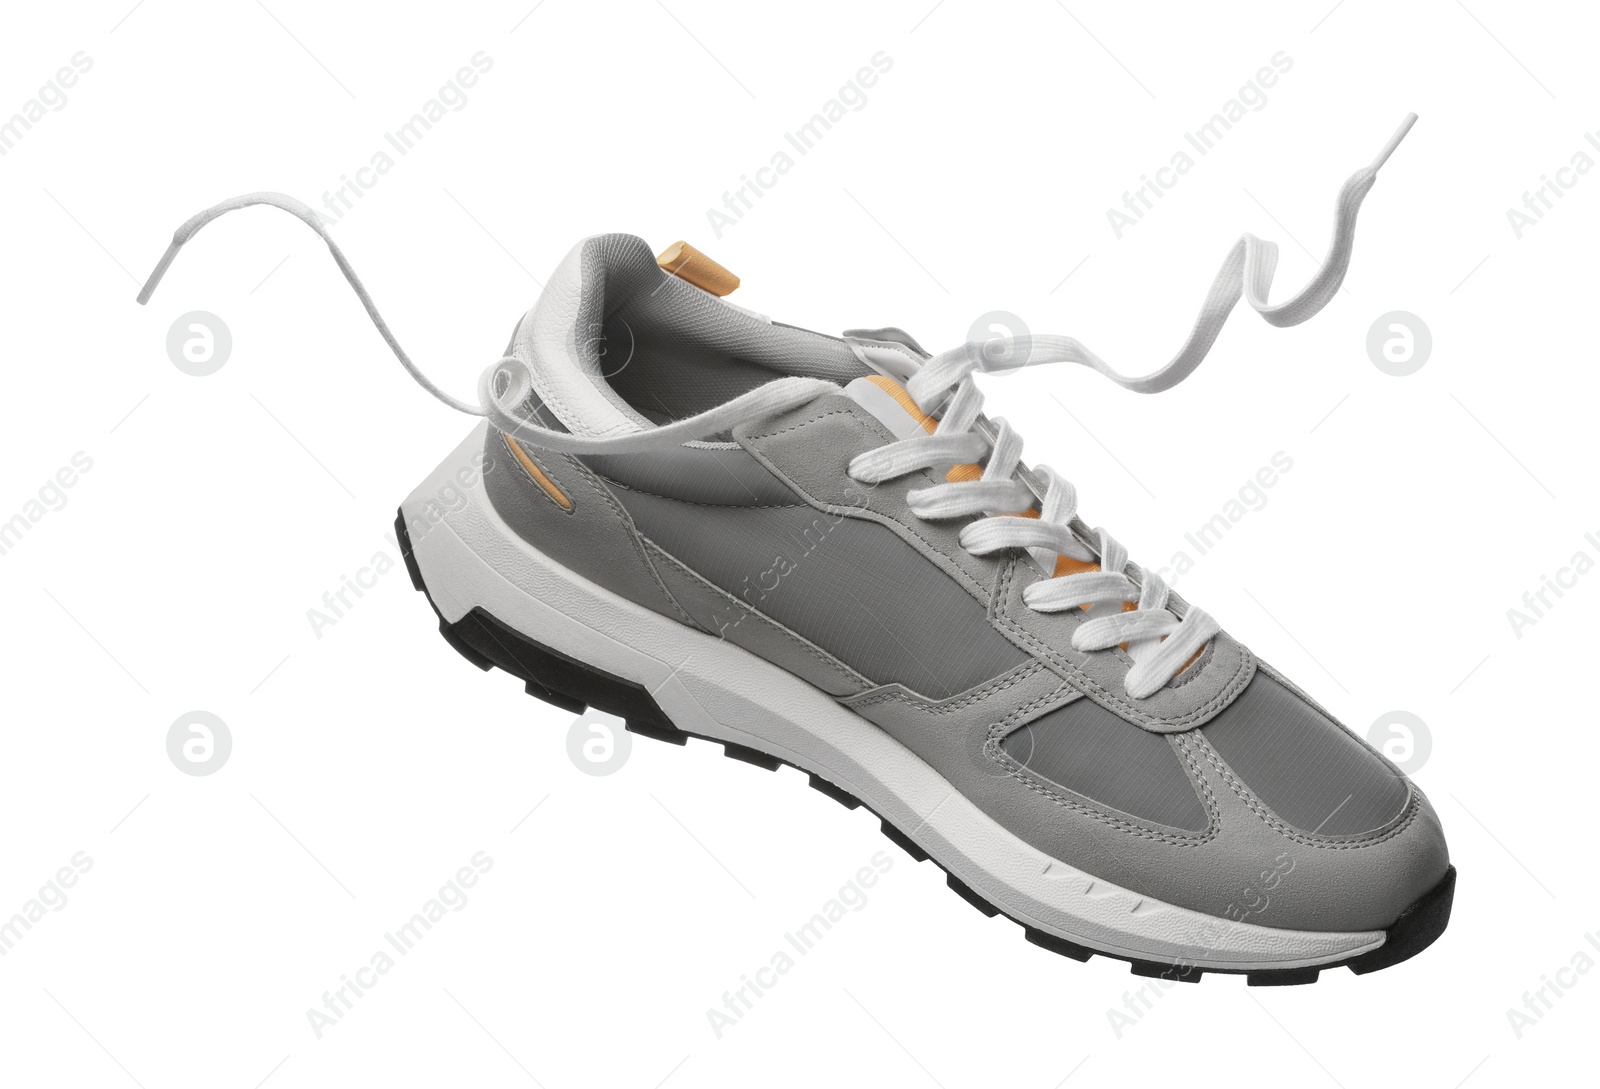 Photo of One stylish new sneaker isolated on white